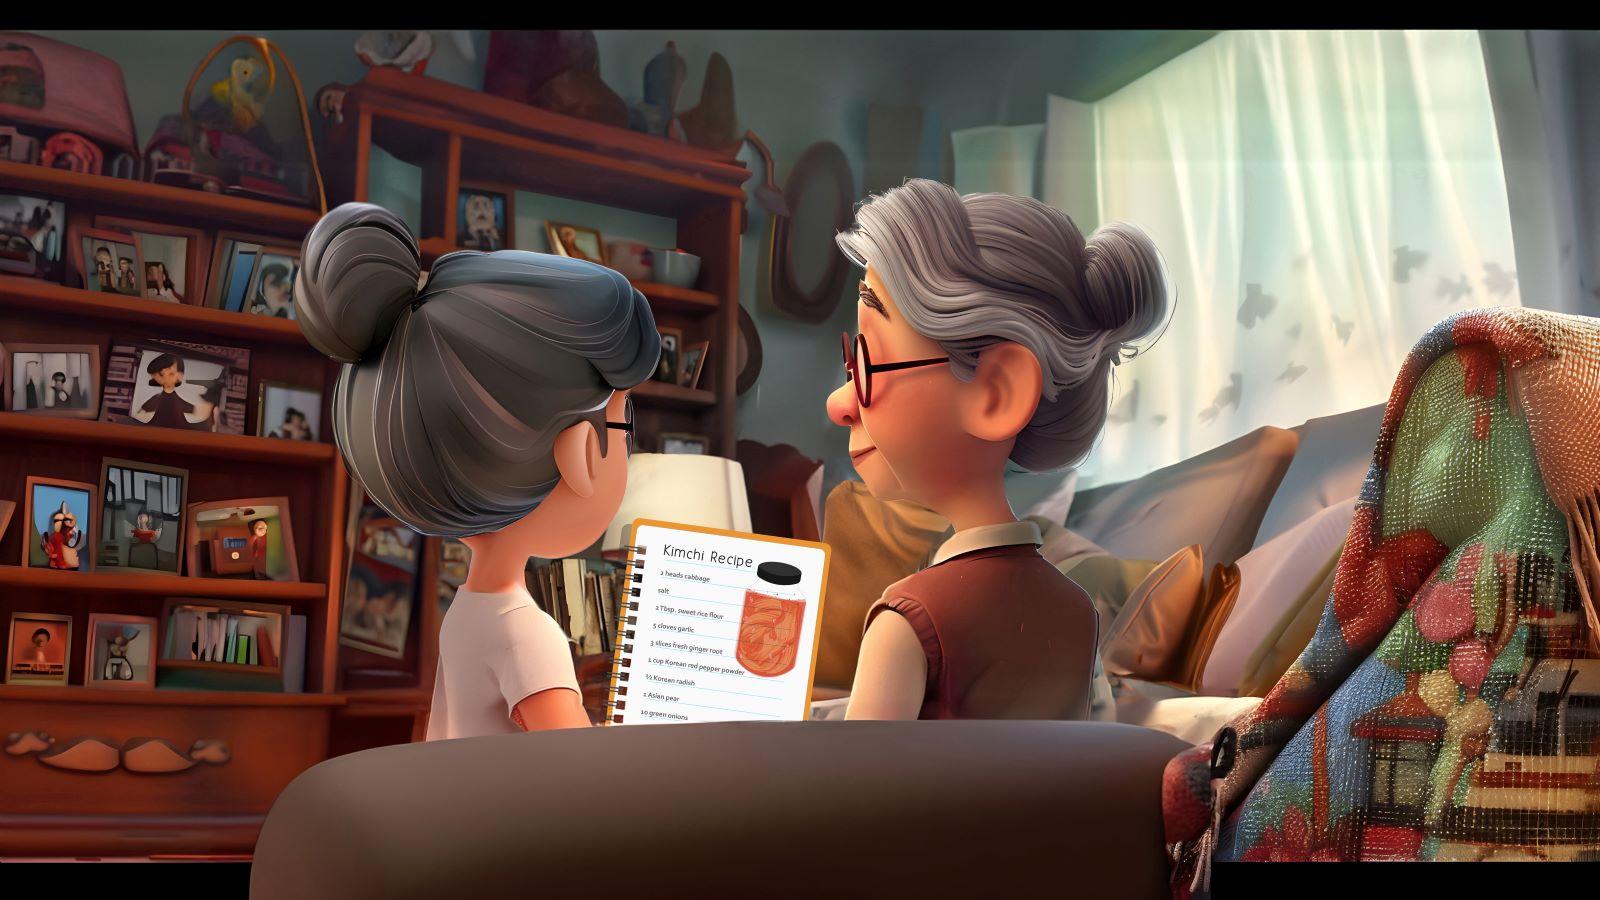 A grandmother and granddaughter looking over a recipe for kimchi.